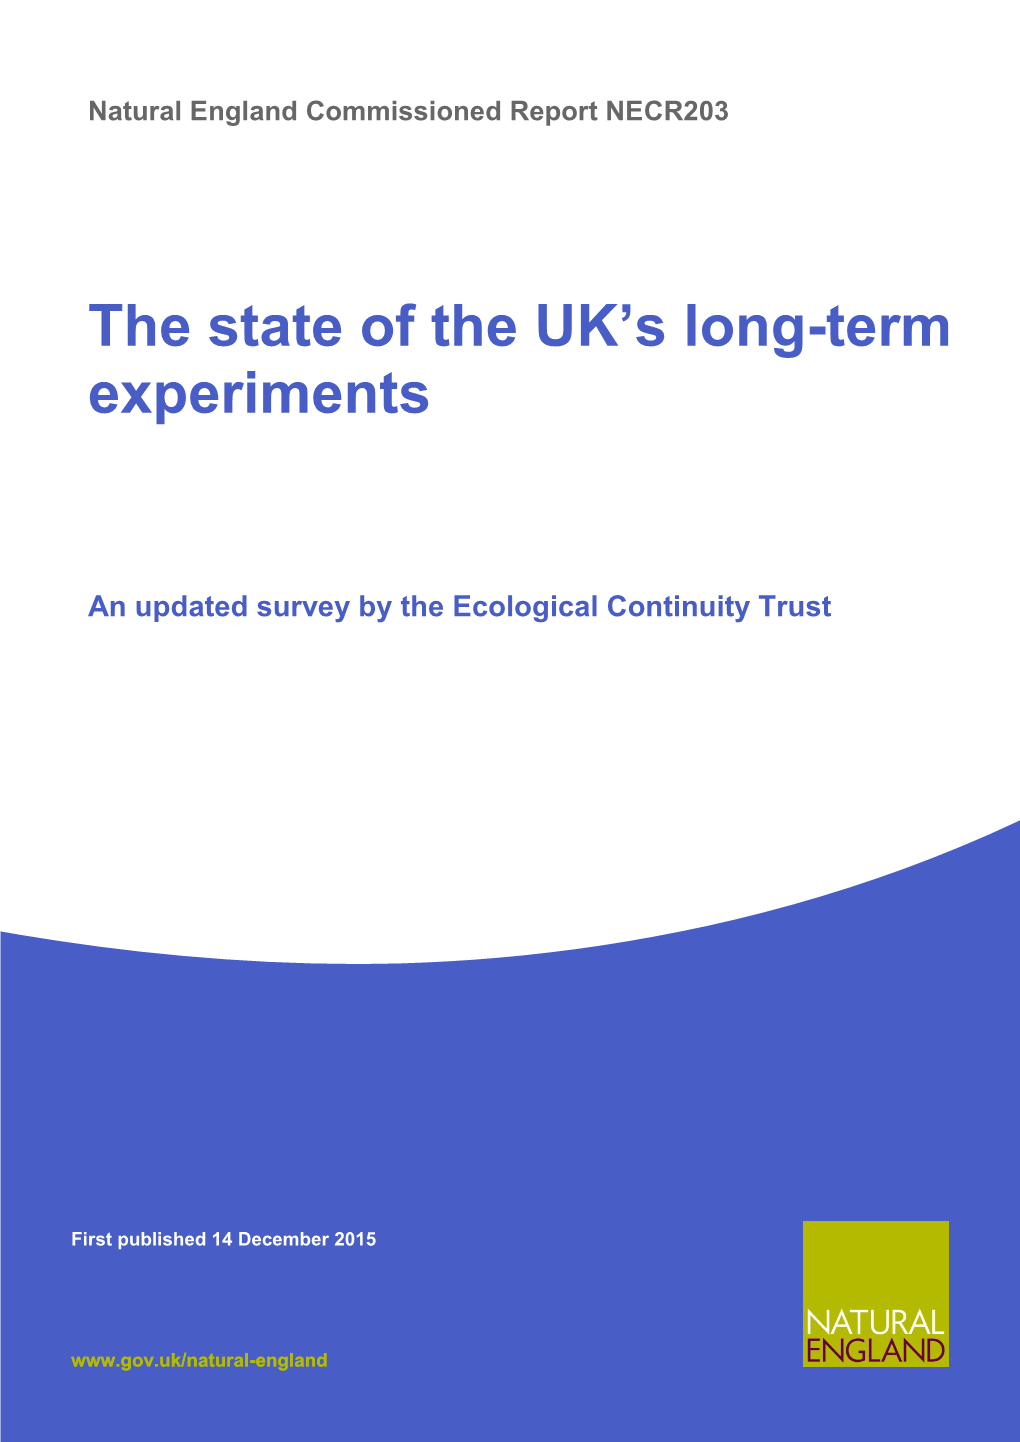 The State of the UK's Long-Term Experiments